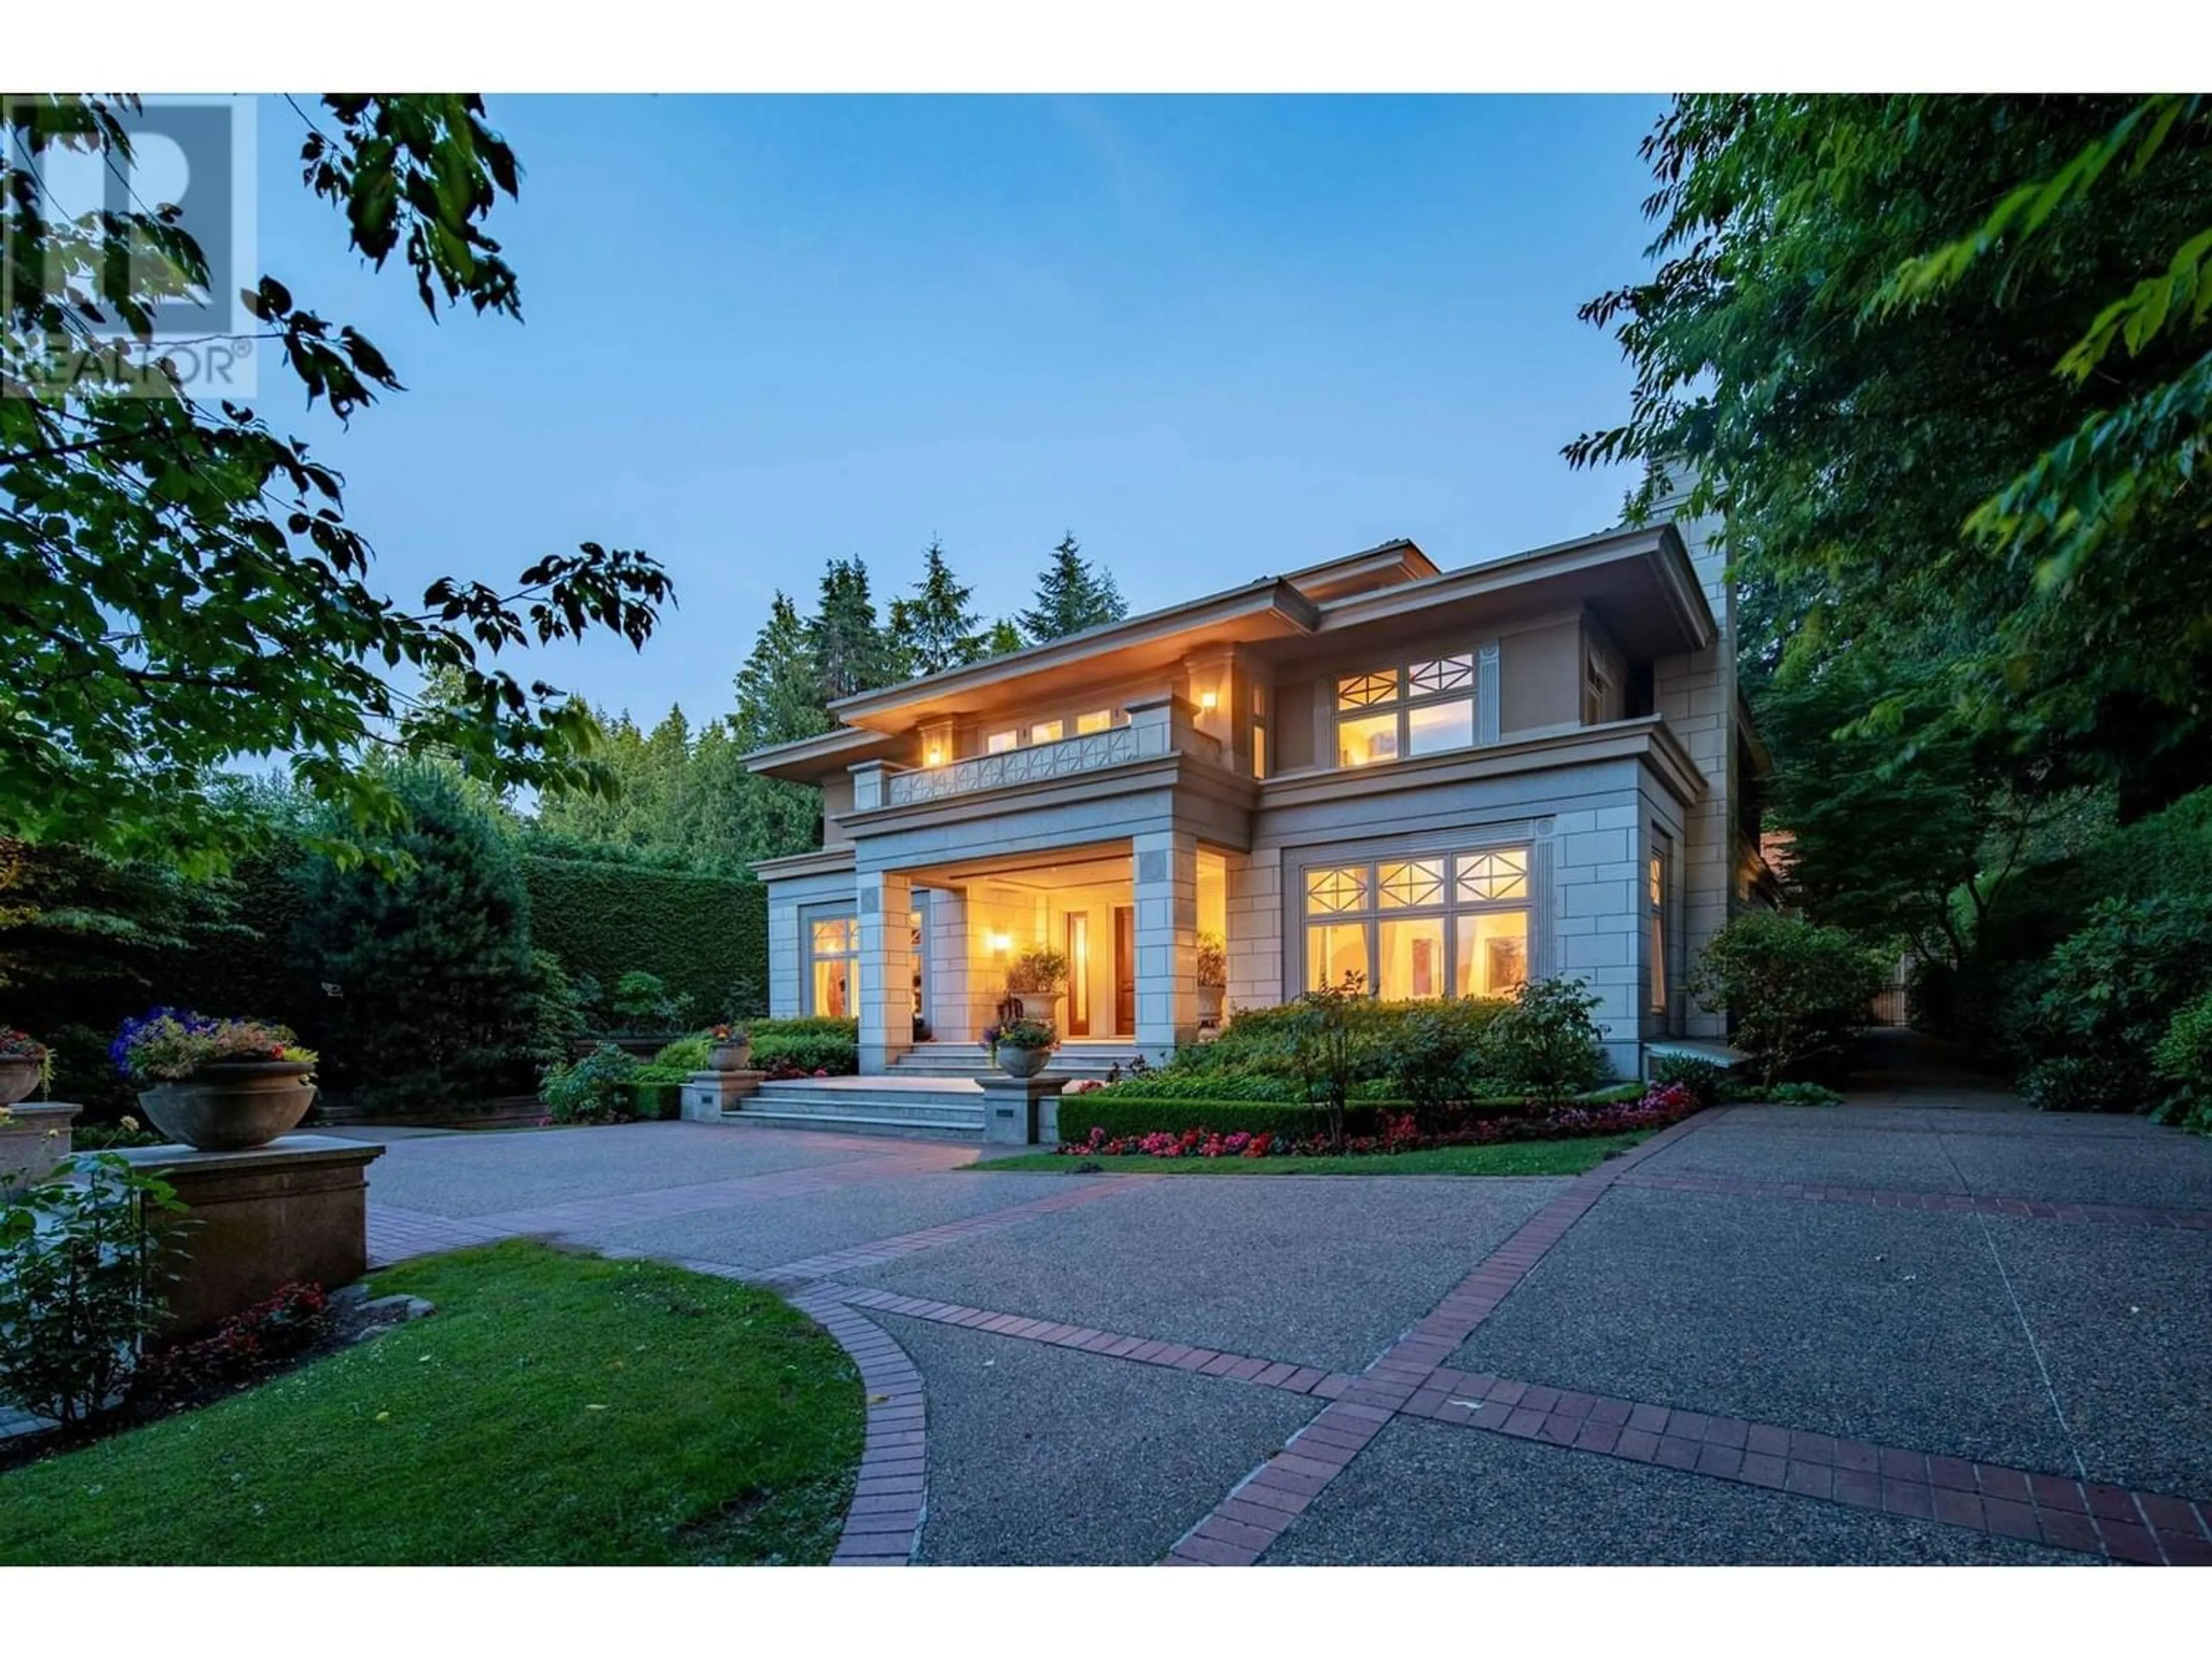 Outside view for 4778 DRUMMOND DRIVE, Vancouver British Columbia V6T1B4